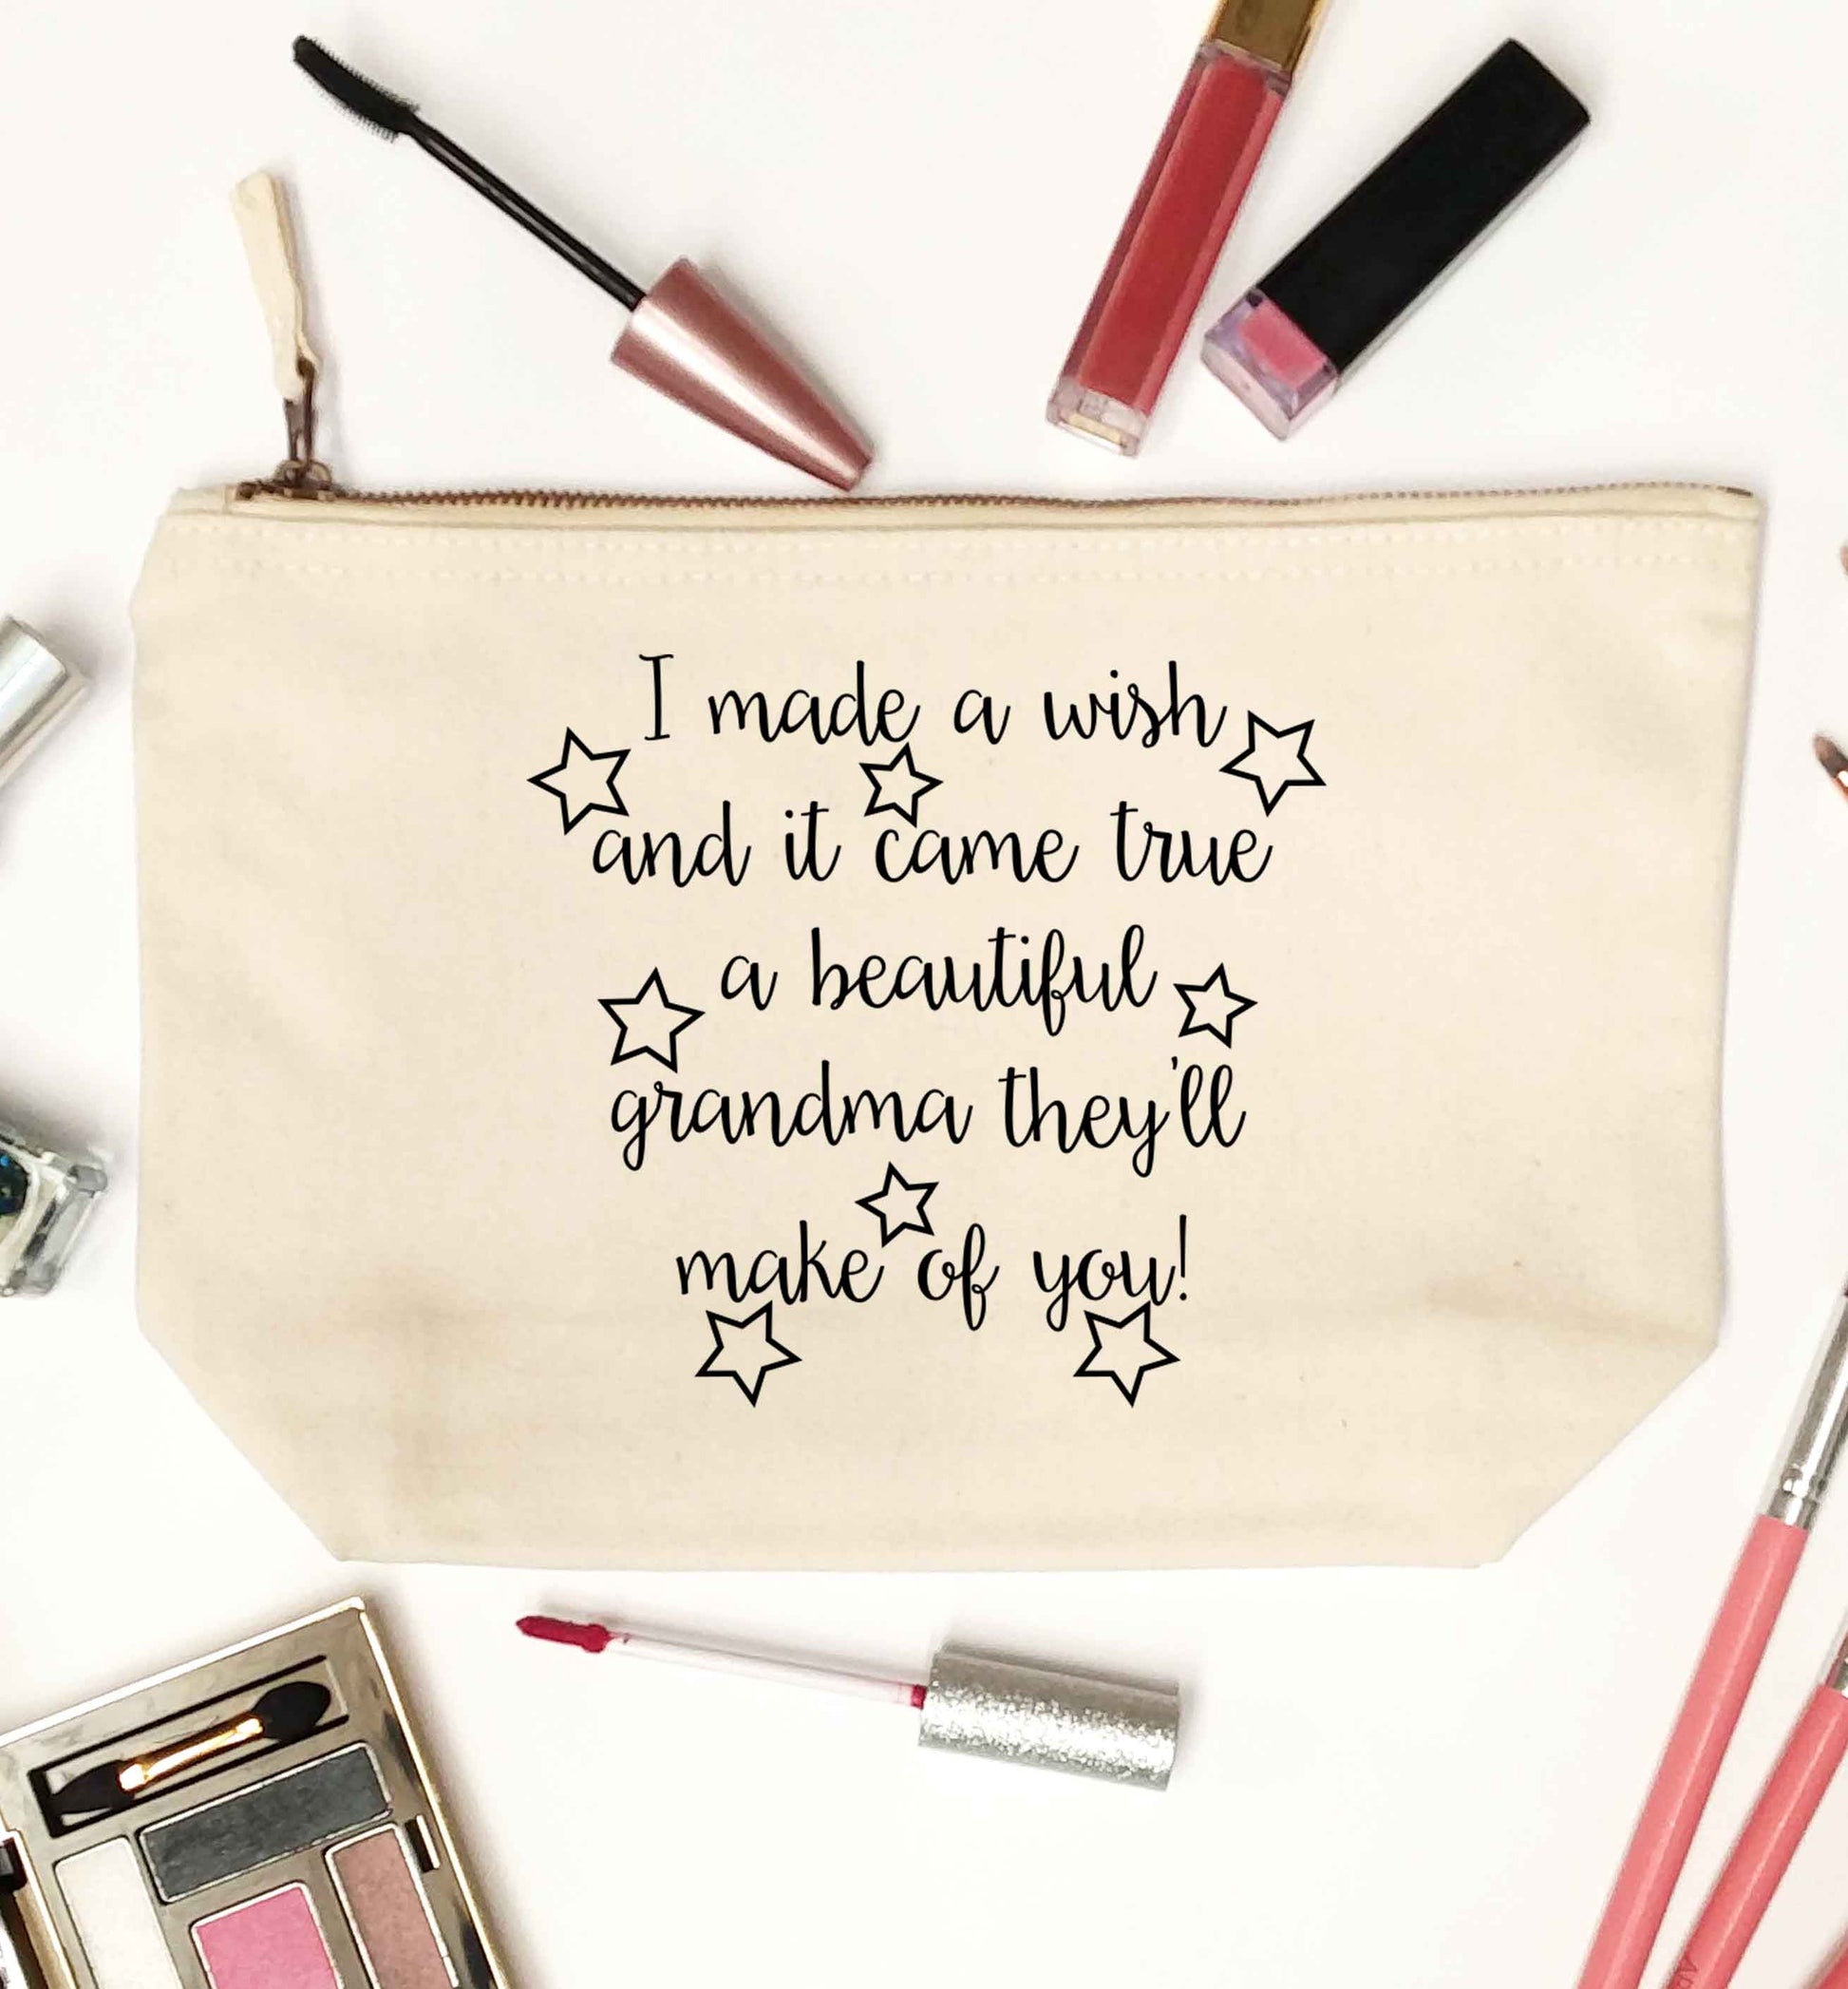 I made a wish and it came true a beautiful grandma they'll make of you! natural makeup bag